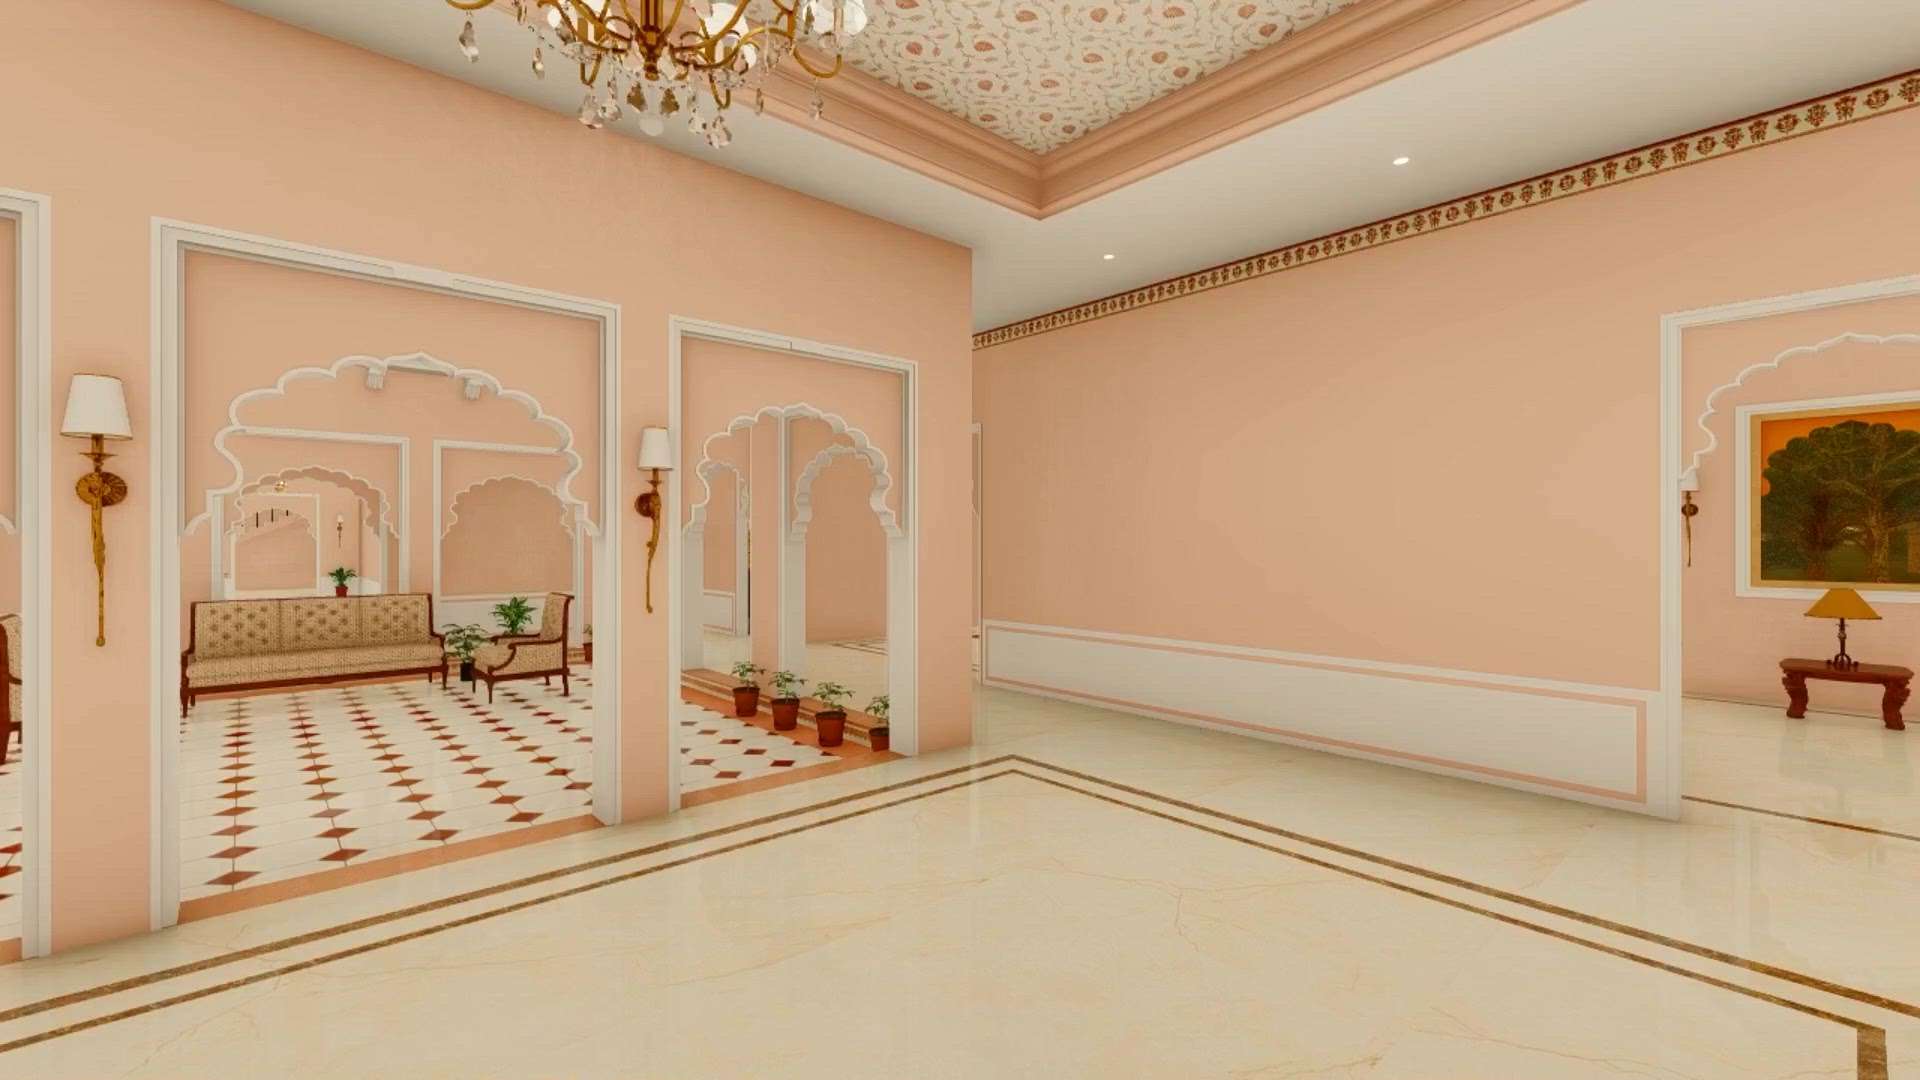 Traditional living room interior design
 #TraditionalHouse  #TraditionalStyle  #heritage  #LivingroomDesigns  #haveli  #InteriorDesigner  #livingroominterior  #architecturedesigns  #Architectural&Interior  #udaipur_architect